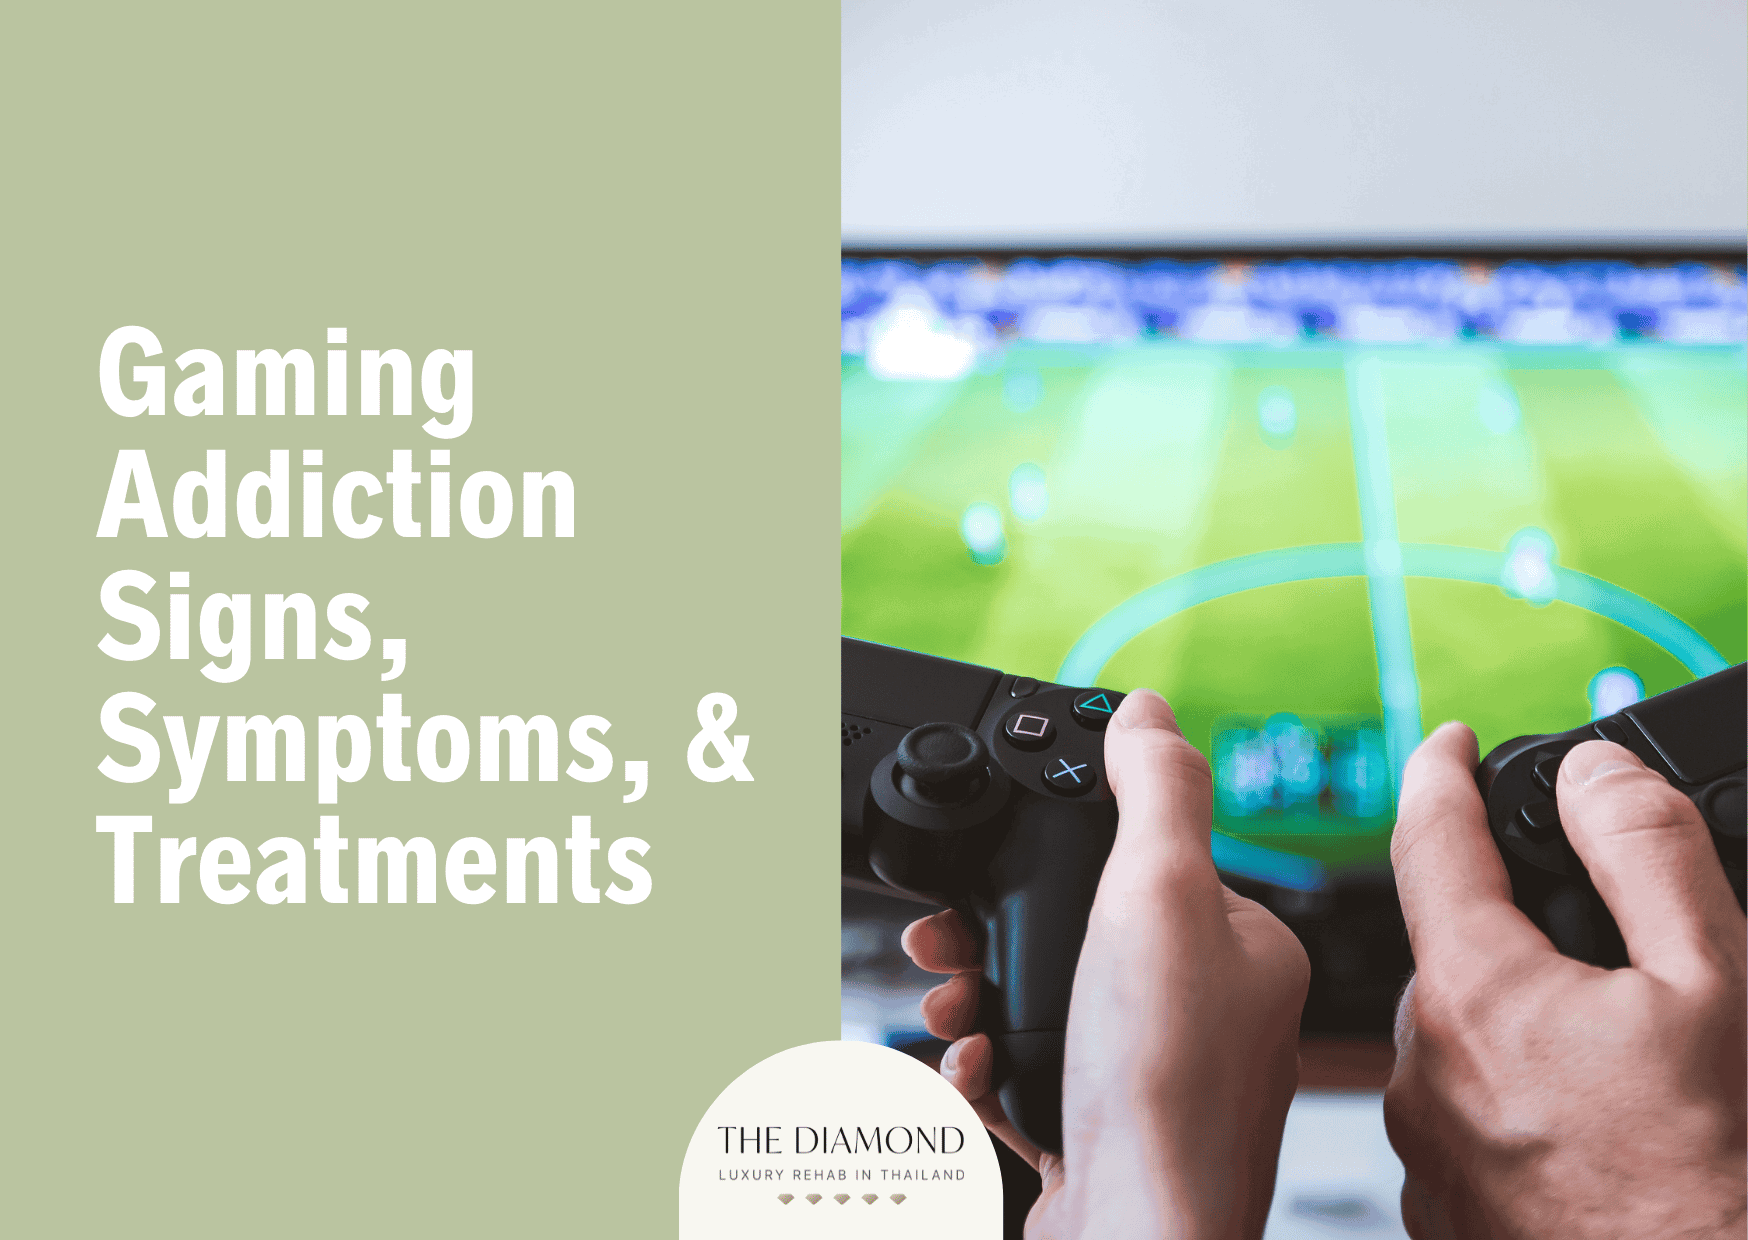 two people -holding-game-controller-infront-of-tv